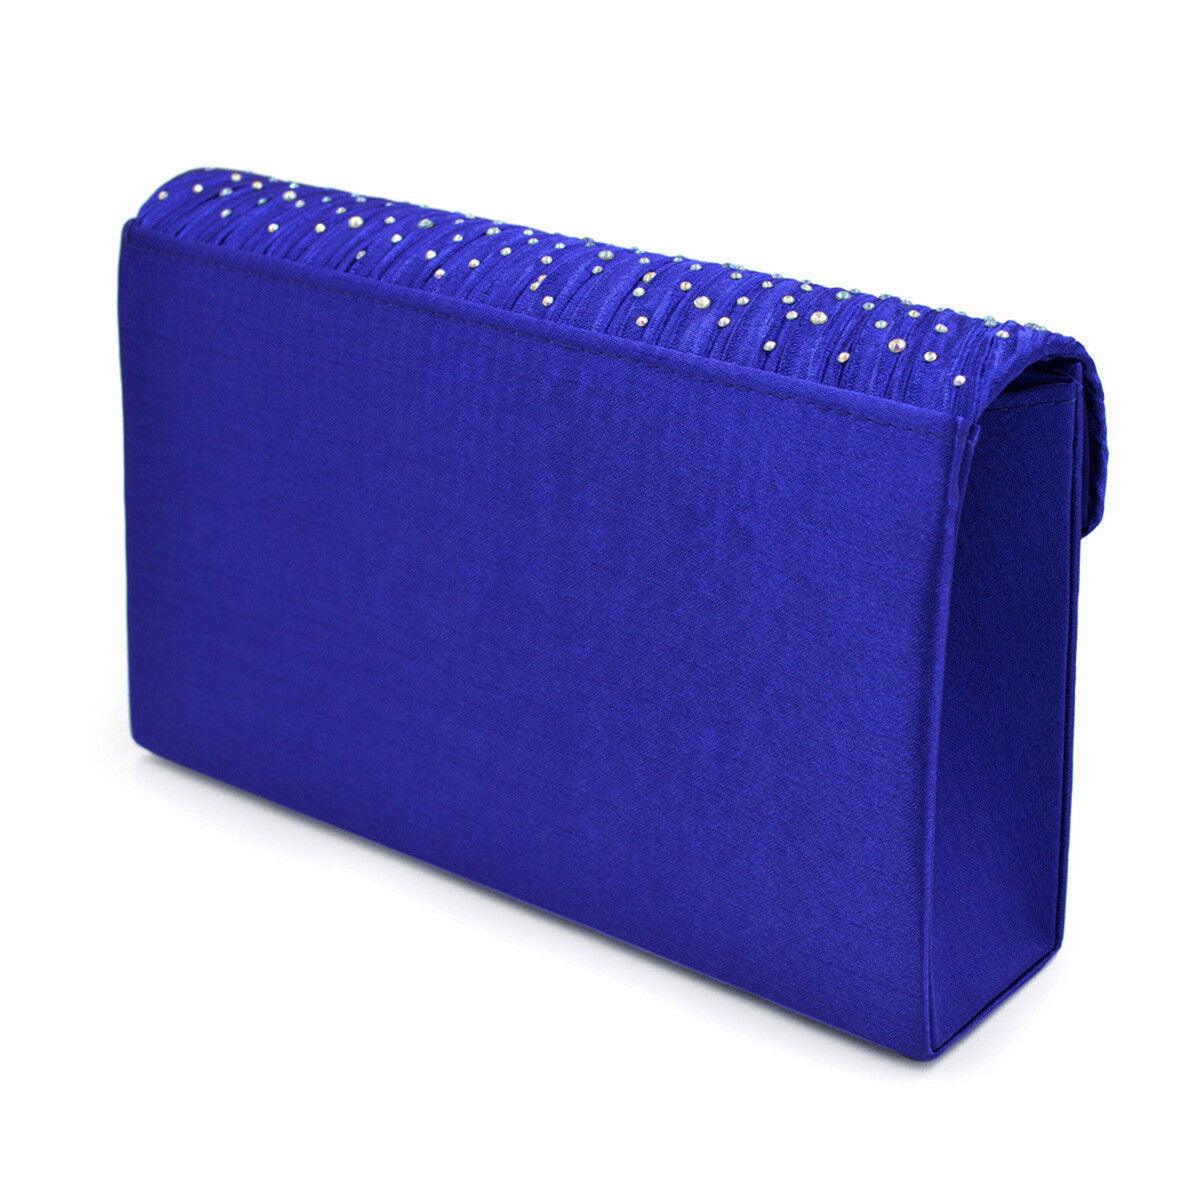 Women's Blue Clutch Bag with Ruched Design and Rhinestone Embellishments